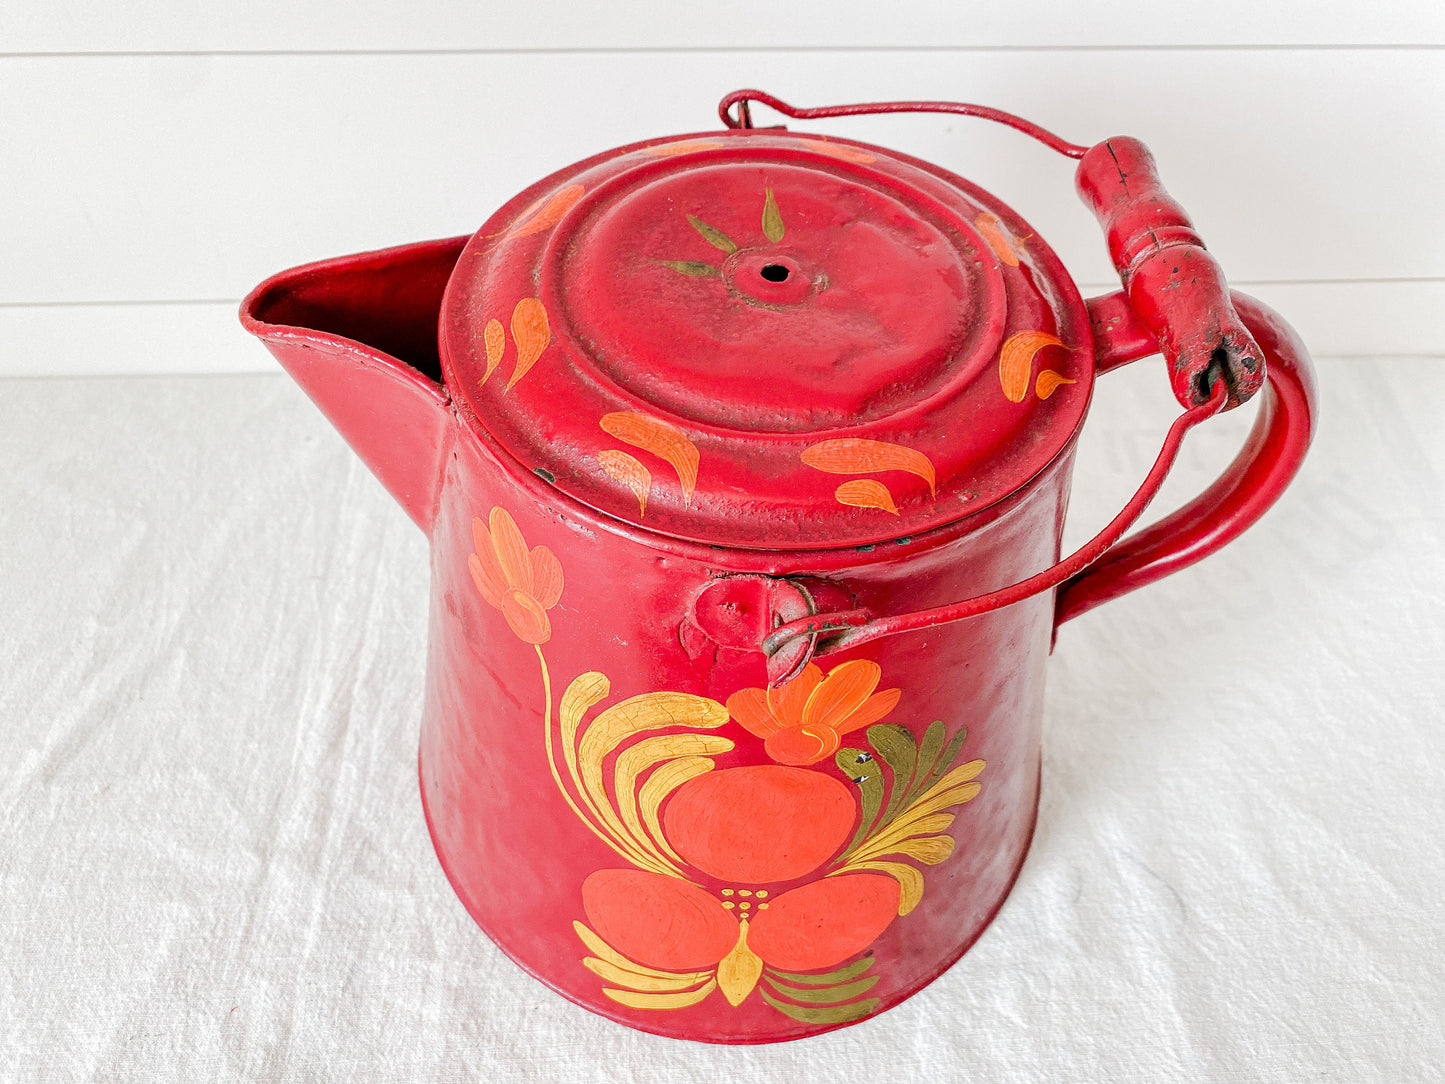 Vintage Hand Painted Red Kettle - Toleware Arts & Crafts Floral Motif Coffee Pot